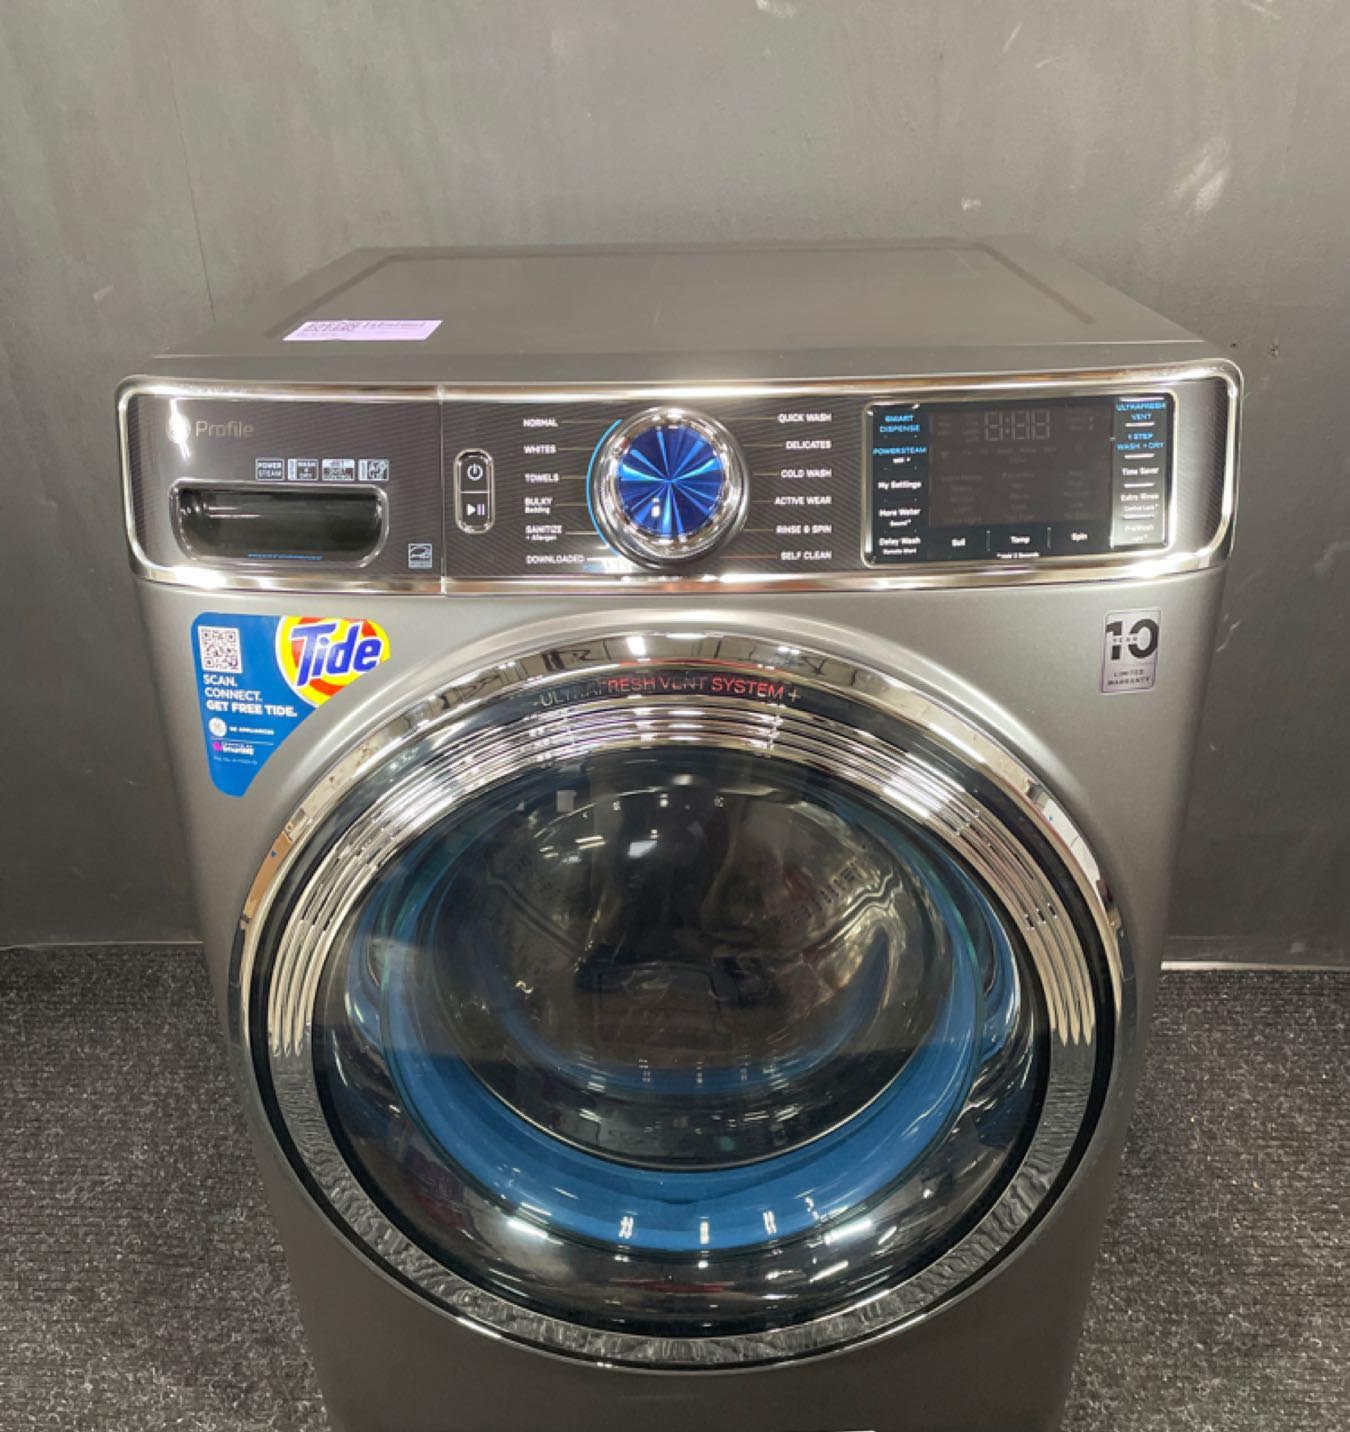 How To Fix The Error Code E69 For GE Washing Machine